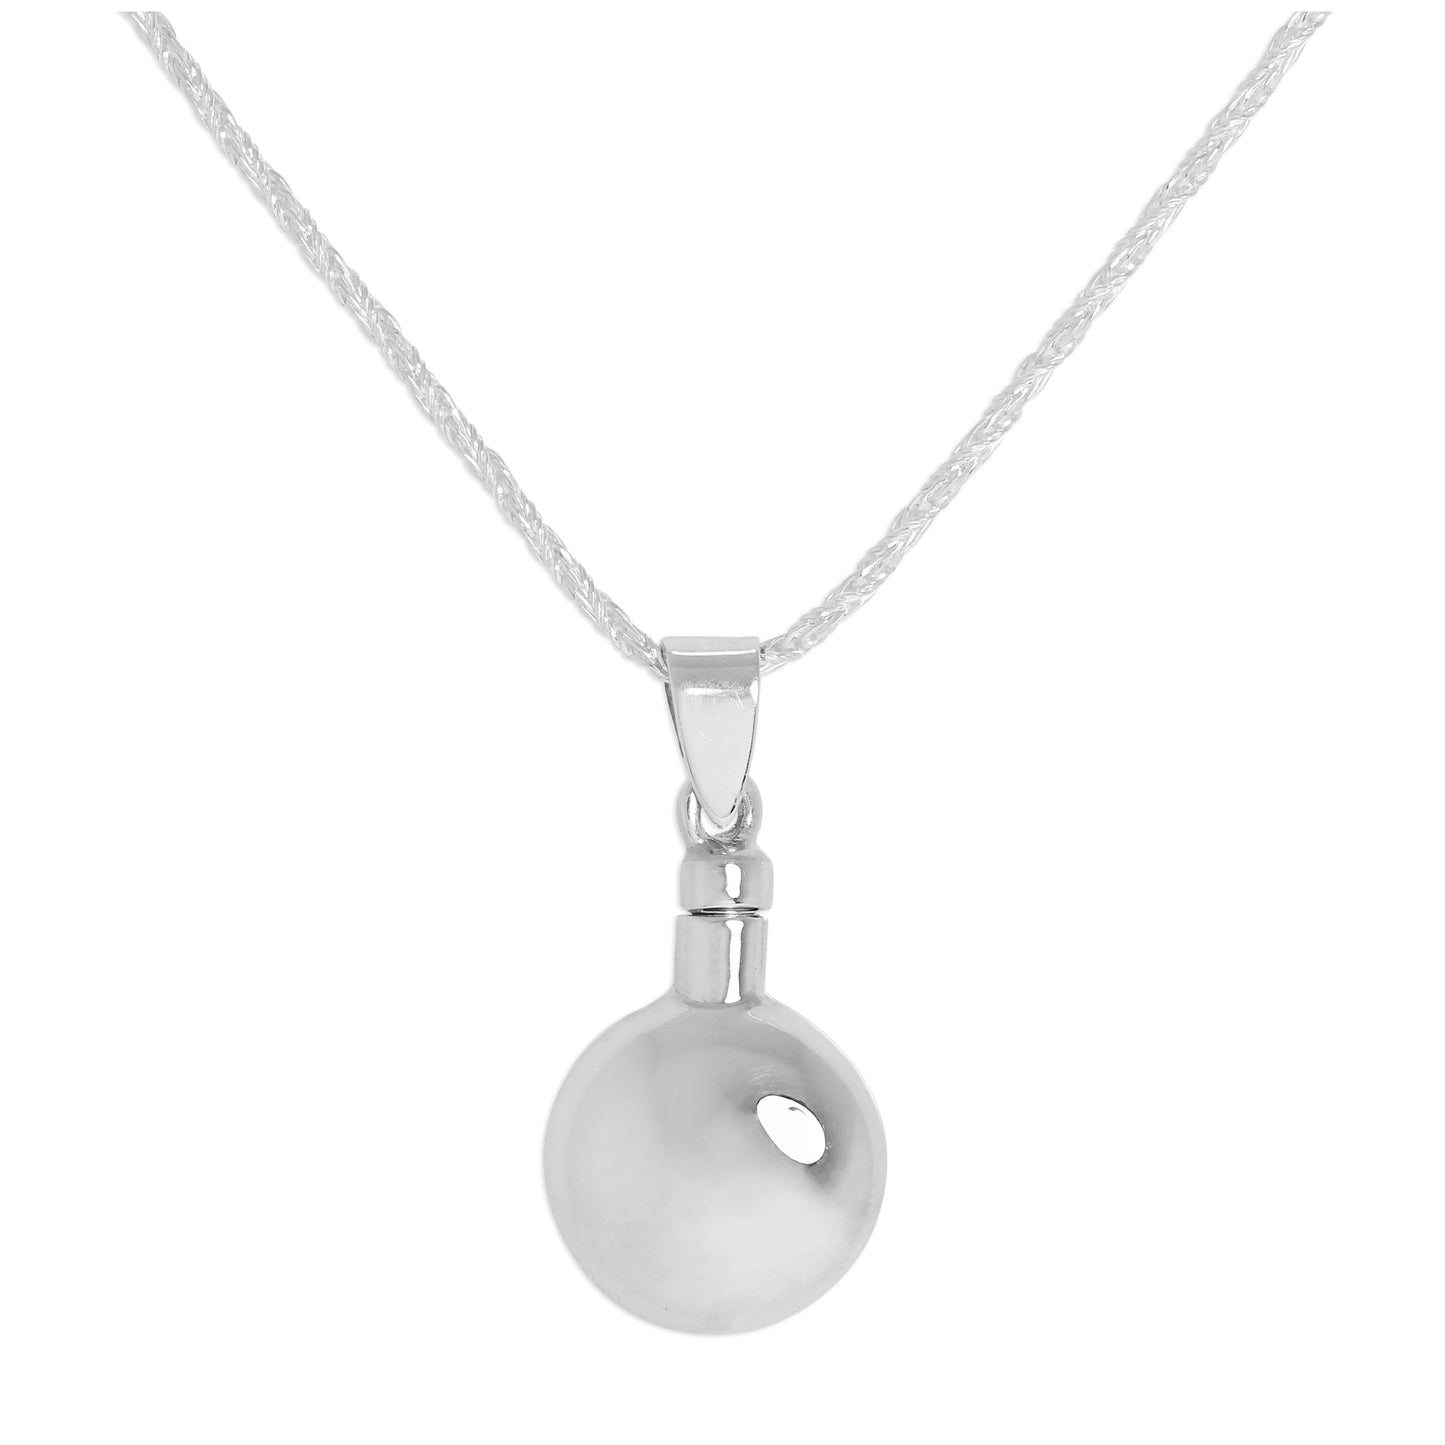 Sterling Silver Round Opening Perfume Bottle Pendant Necklace 16 - 24 Inches